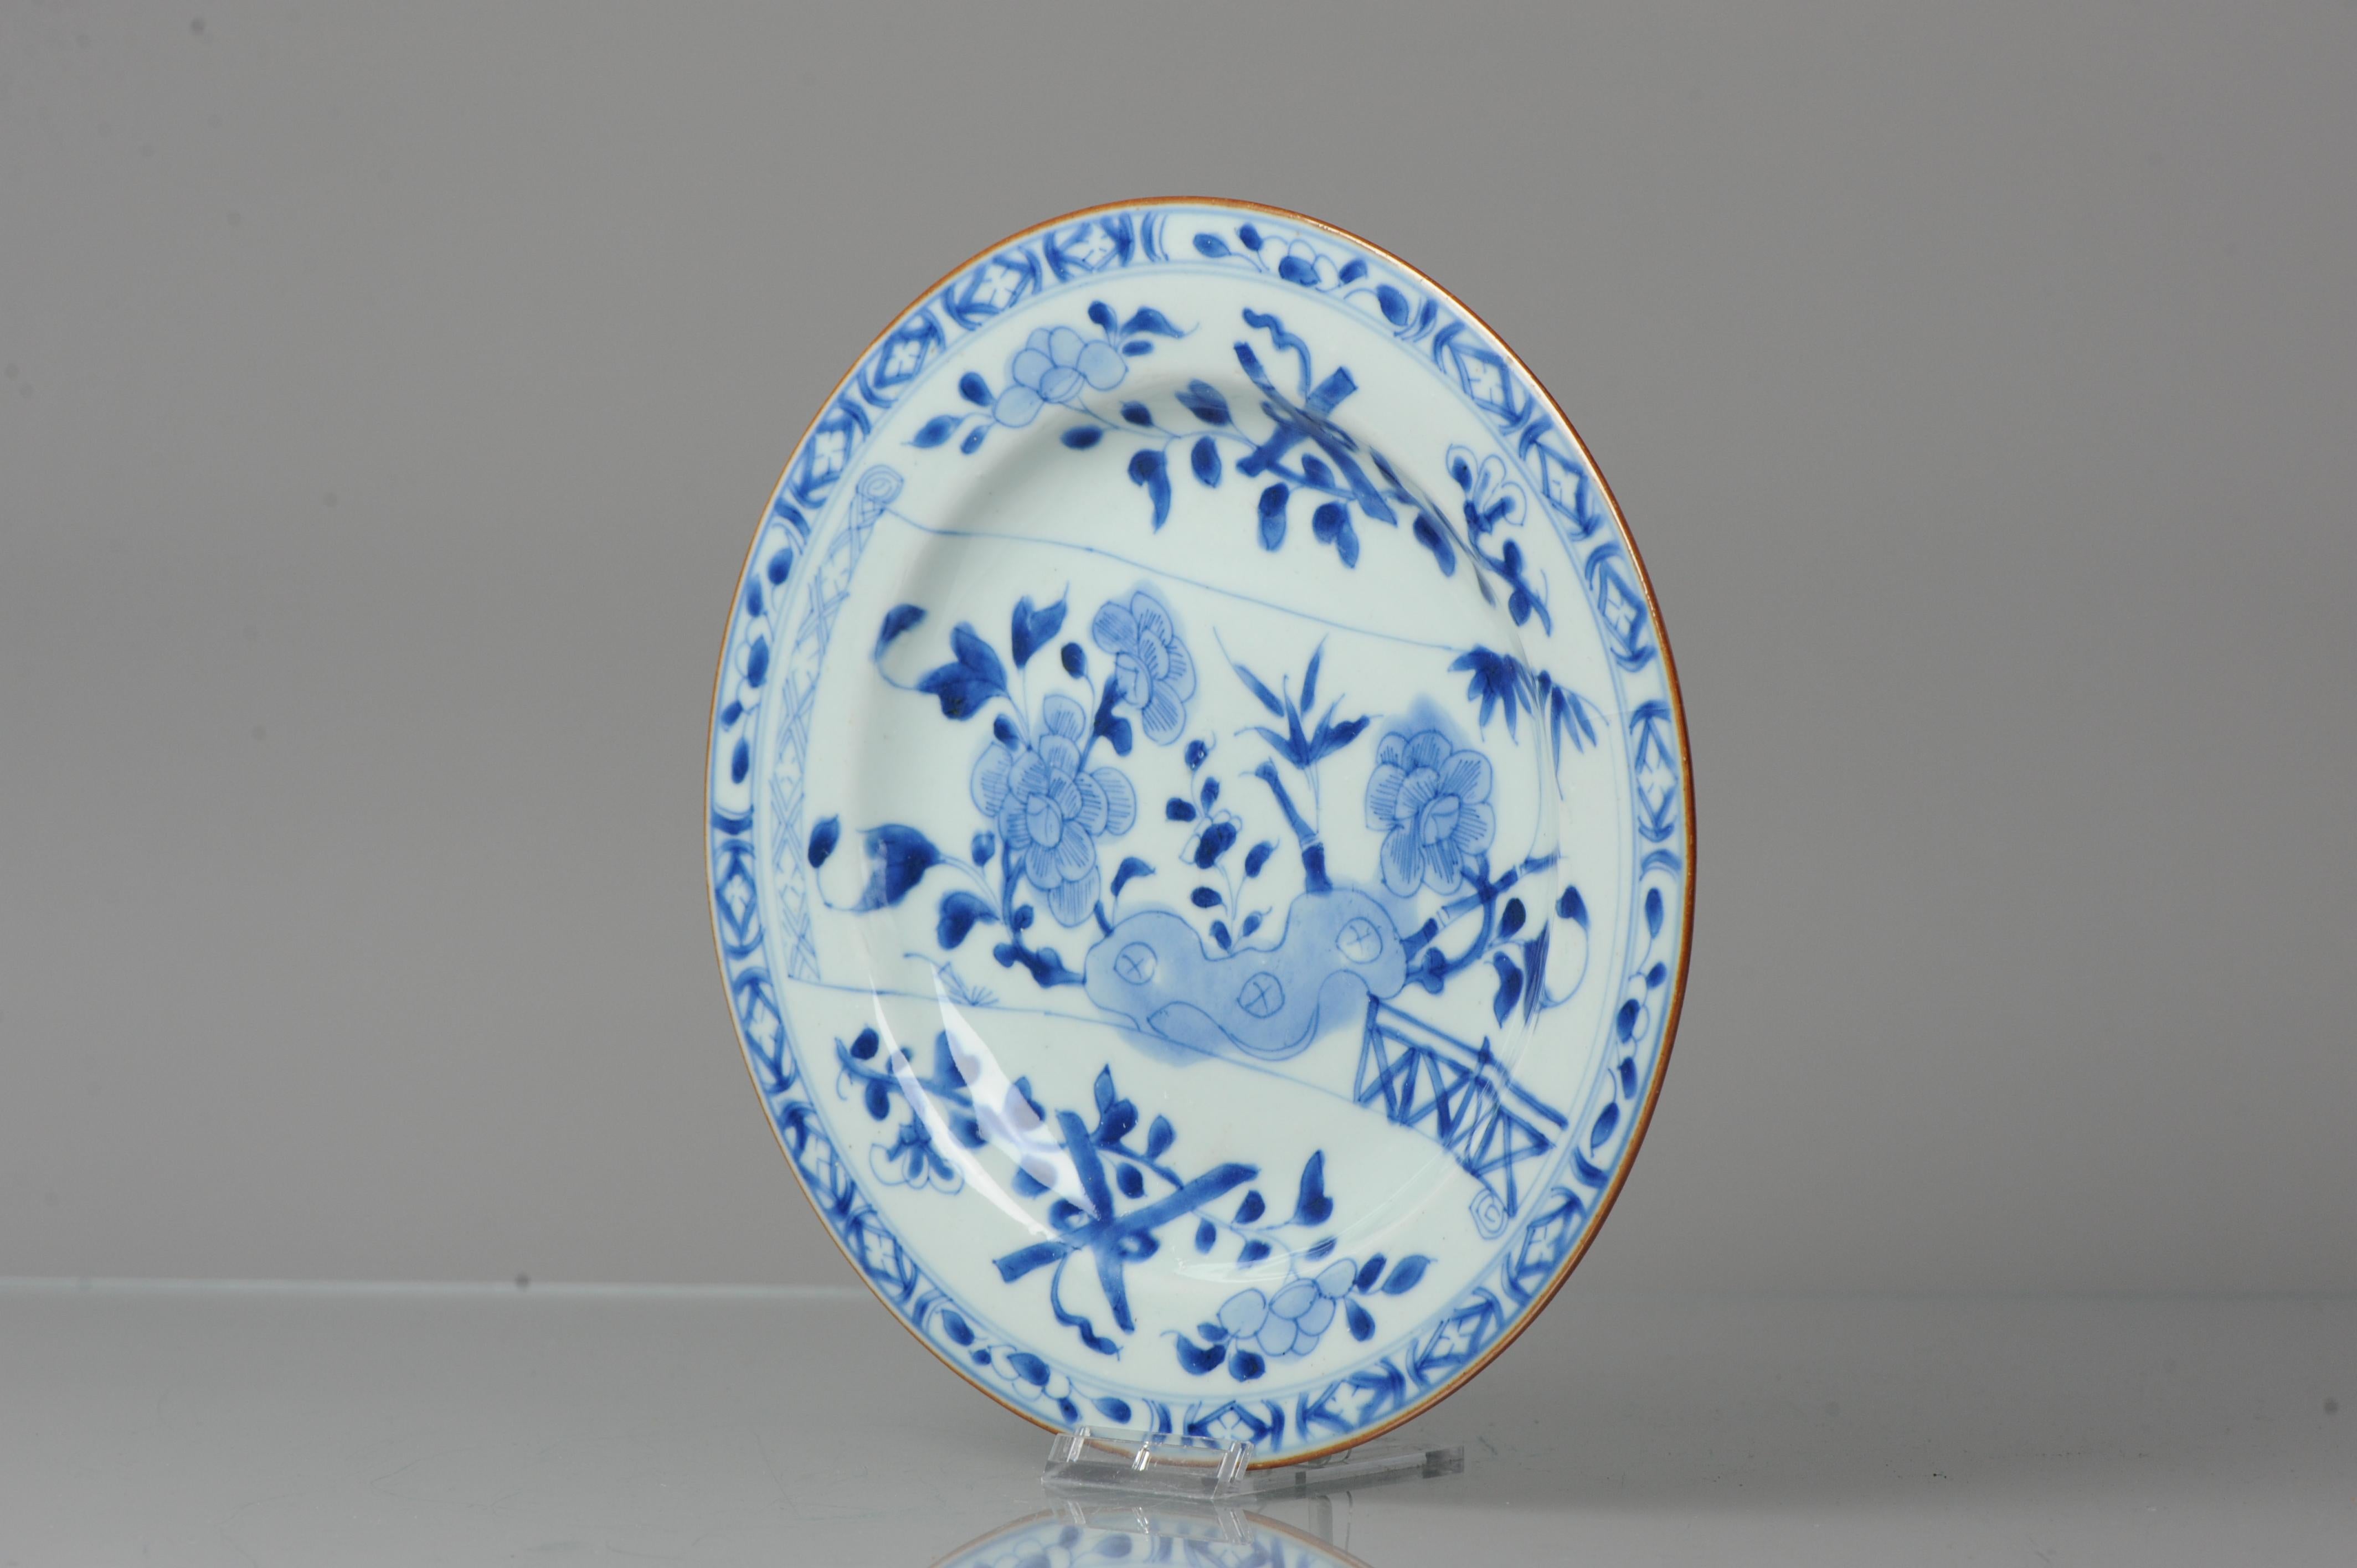 Kangxi period 18th century chinese porcelain scroll dish. Visible is a garden scene painted on a scroll. Three friends of winter, fences and objects are painted in different kind of combinations. This is a scene to get lost in.

Additional